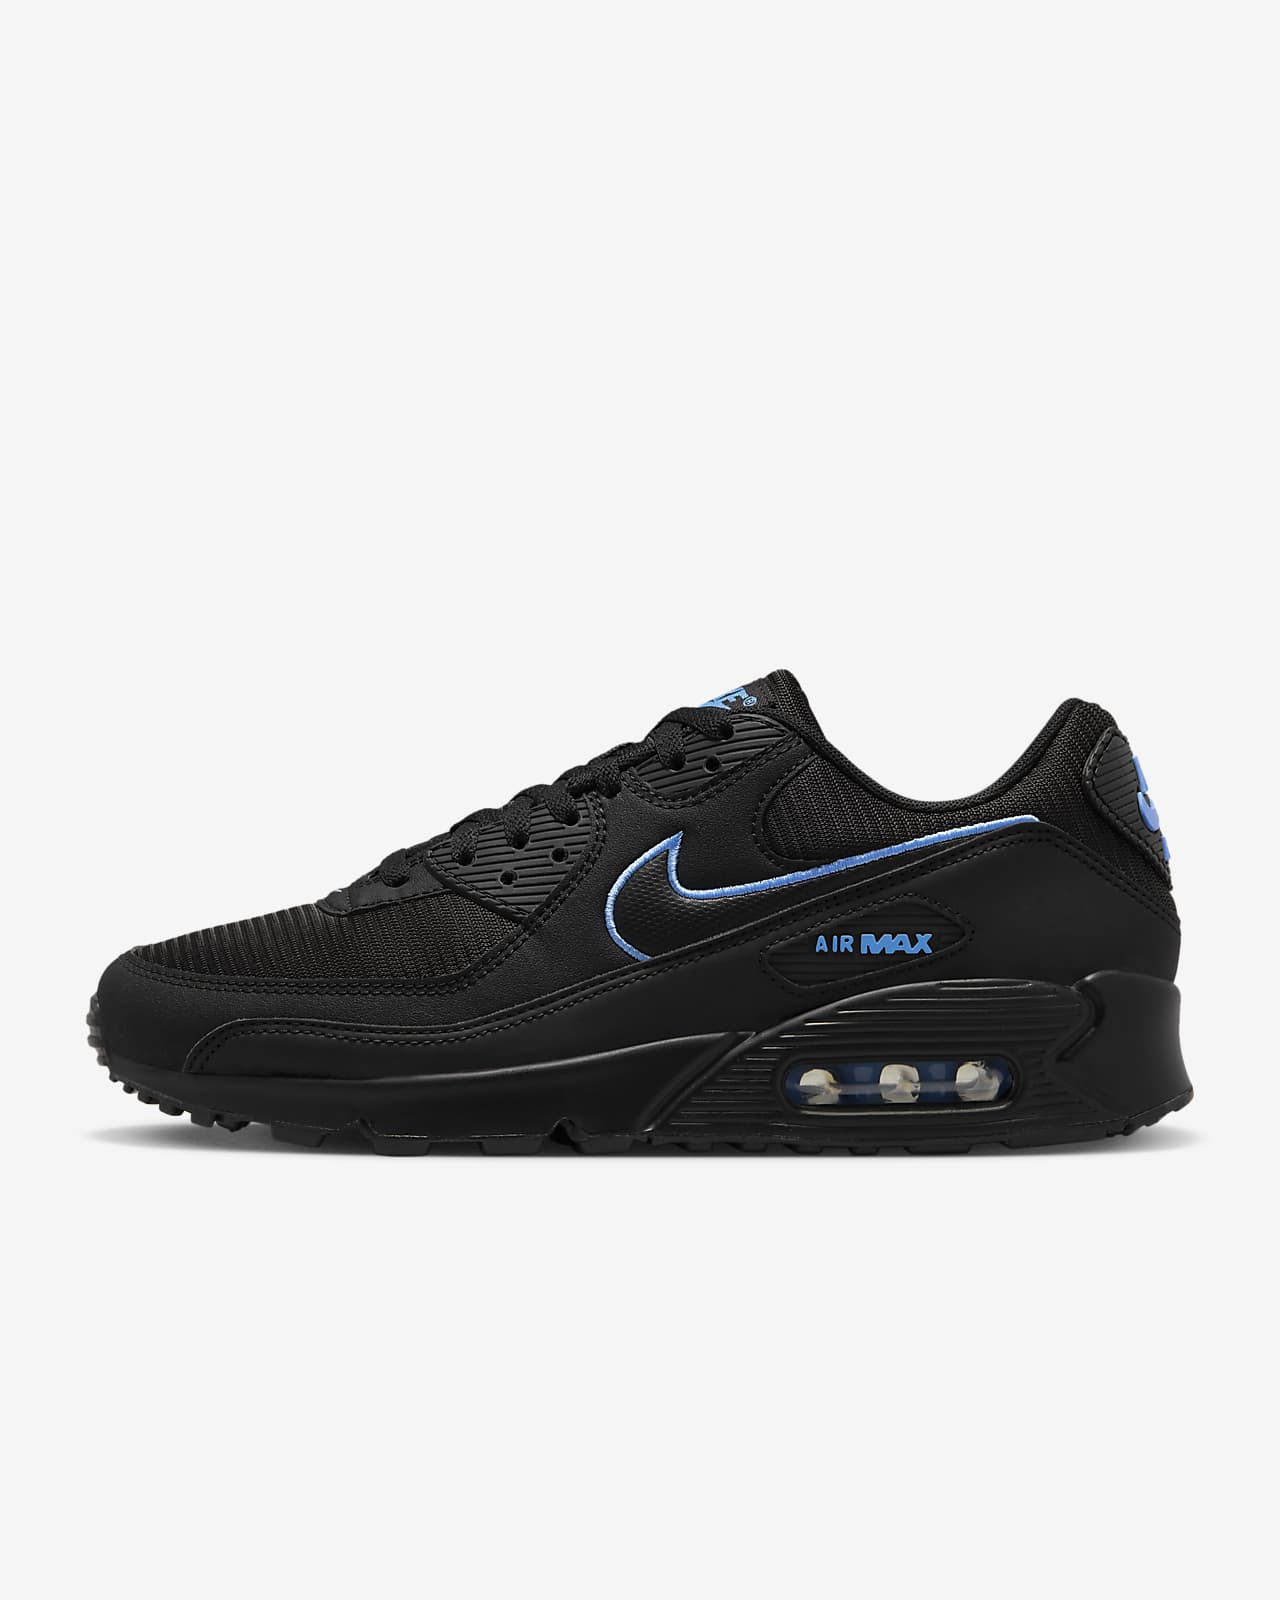 https://static.nike.com/a/images/t_PDP_1280_v1/f_auto,q_auto:eco/c9438b52-c06e-45fd-a253-4d2f3cdd3ef5/air-max-90-shoes-Vmvwxl.png